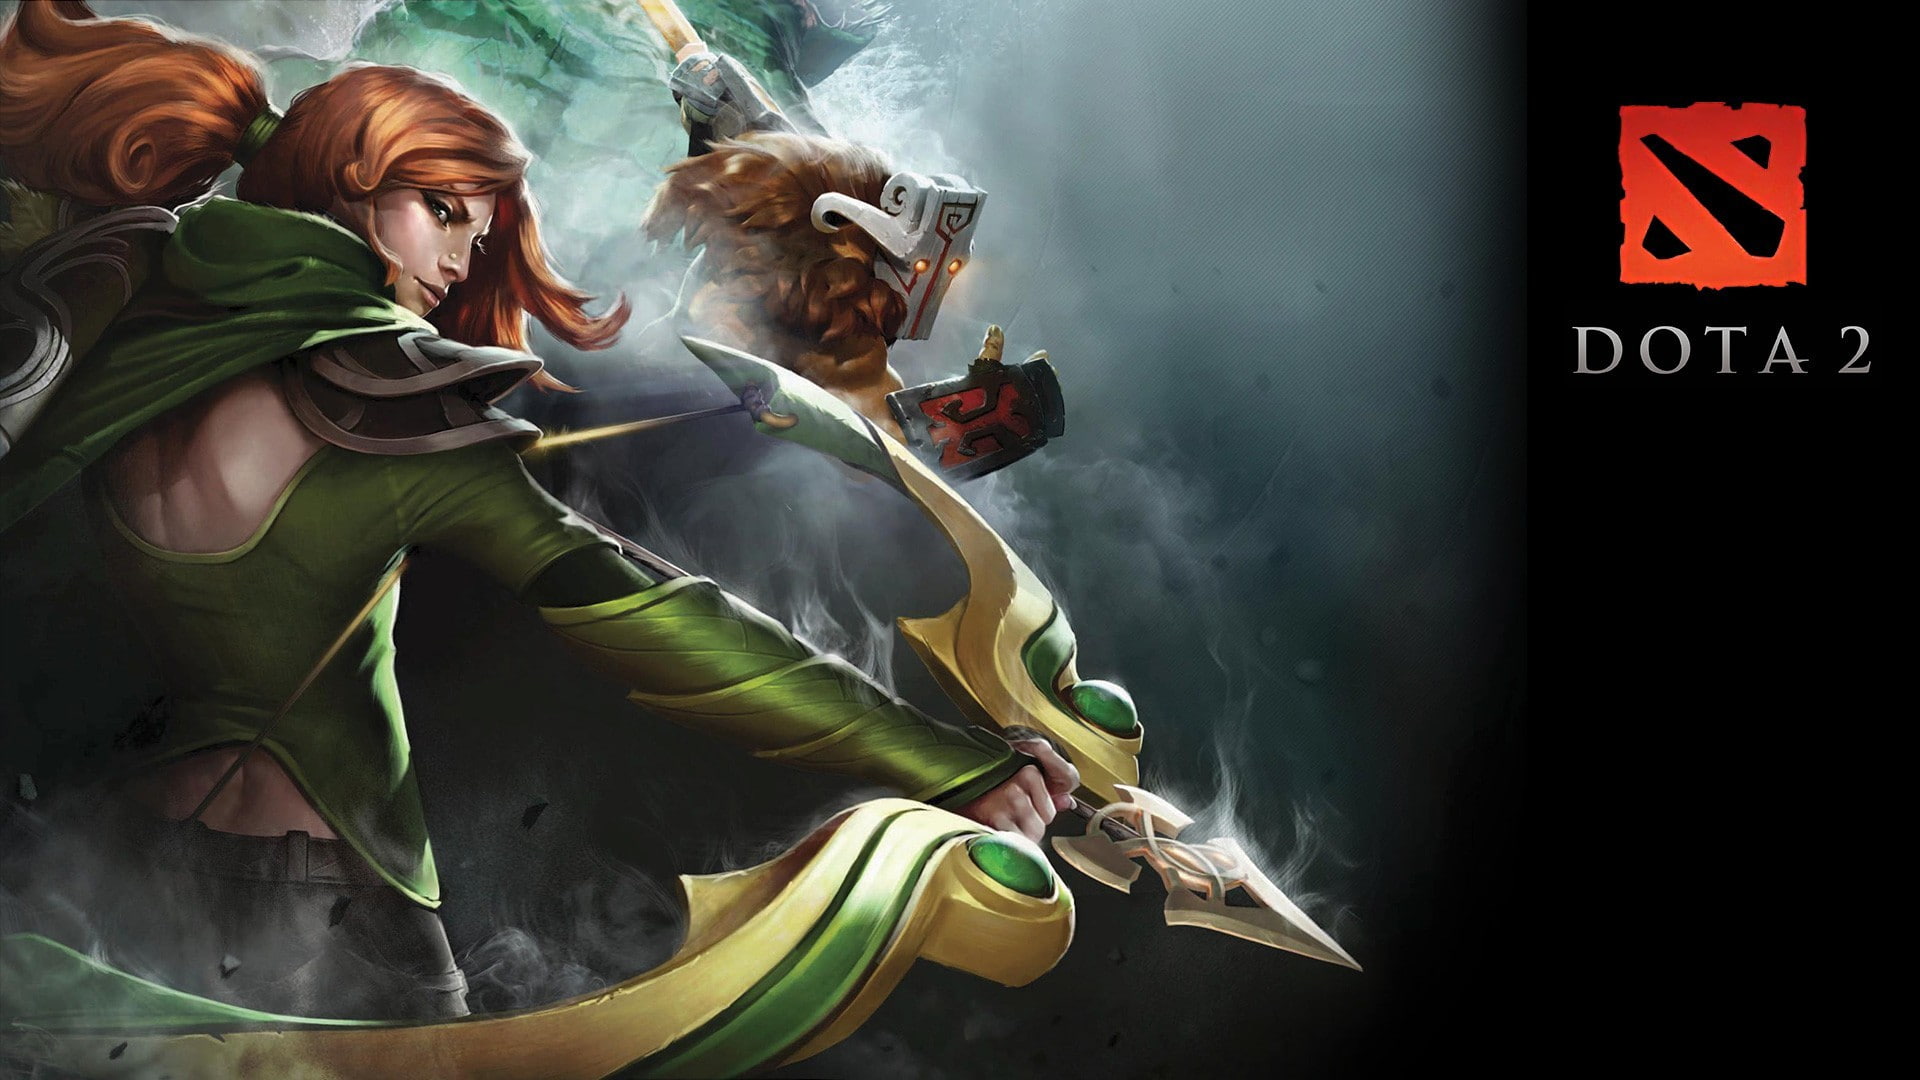 Dota 2, Windranger, Video Games, Arrow, Bow, Characters